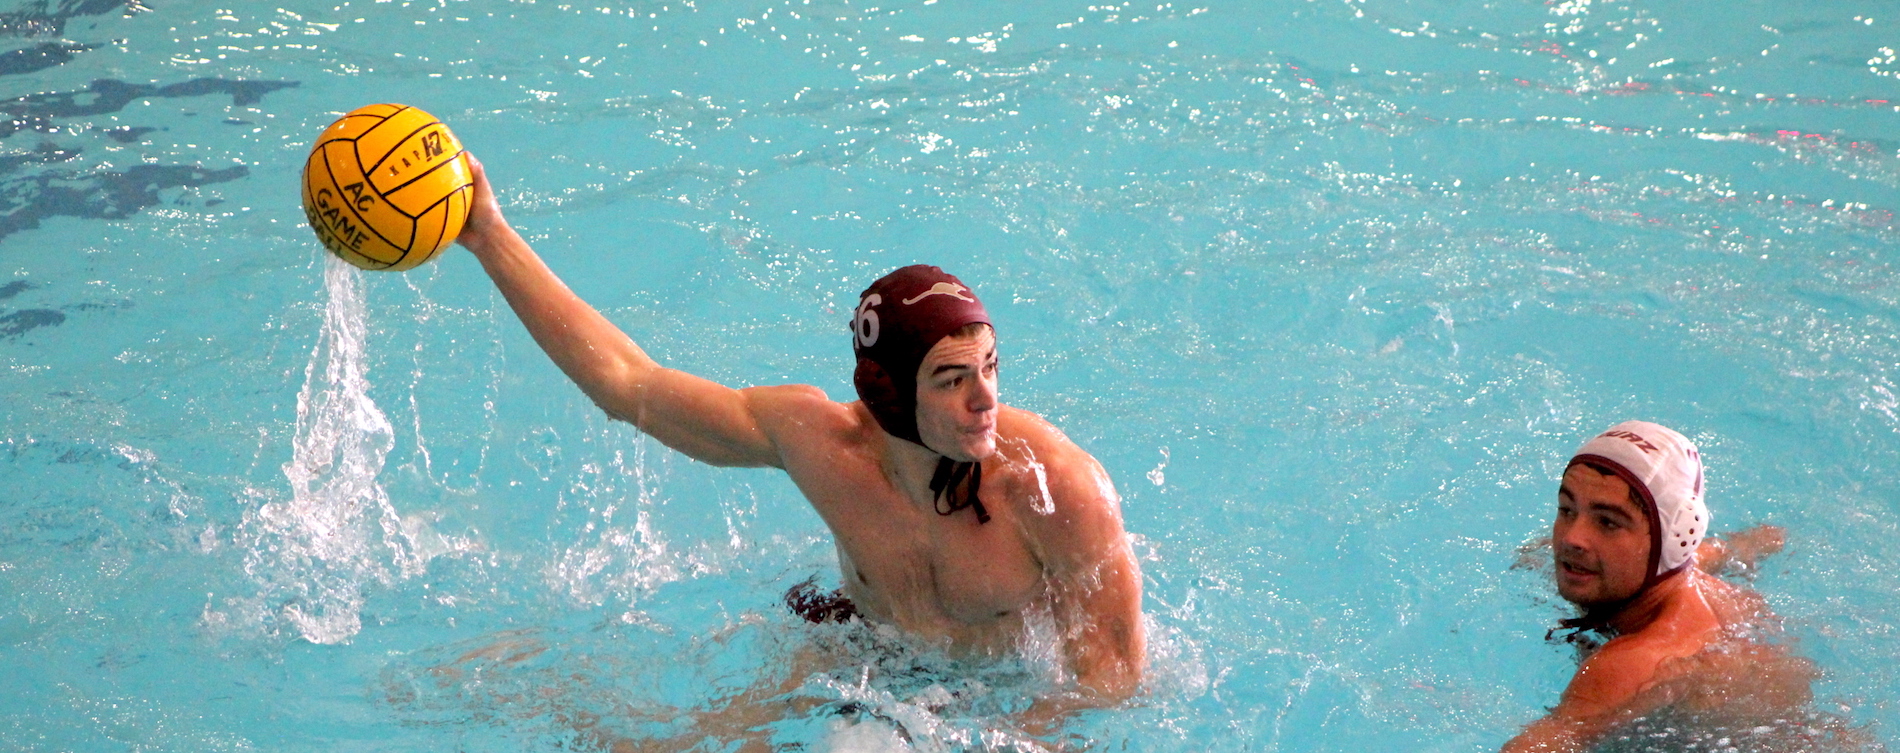 Men's Water Polo Plays Well to Open Season